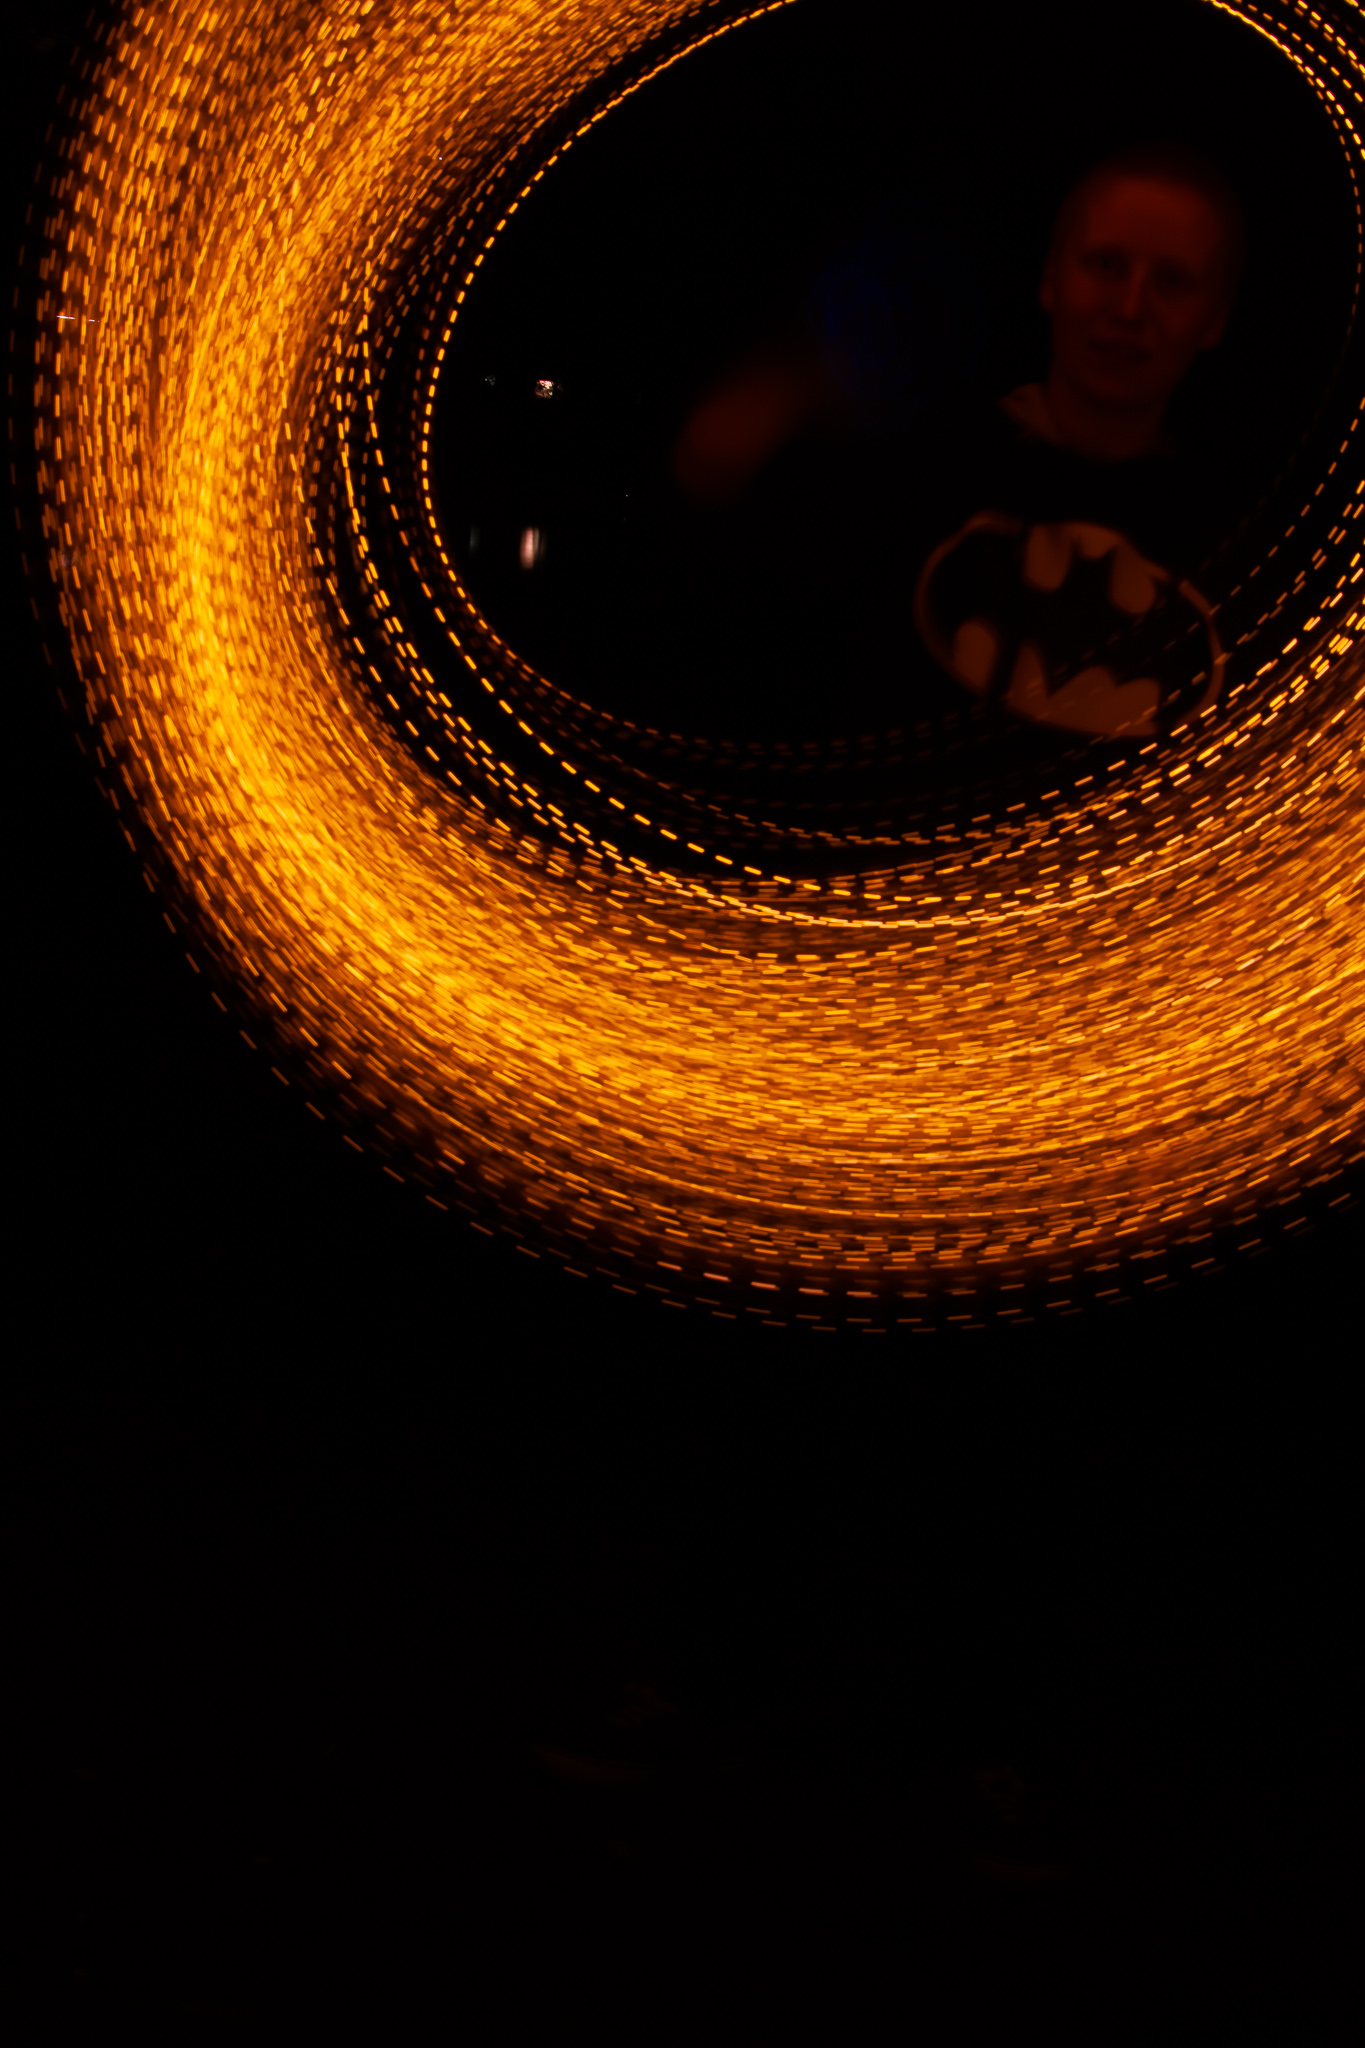 the subject in the batman hoodie once again surrounded by orange light trails, only this time the trails are dotted and not sparks